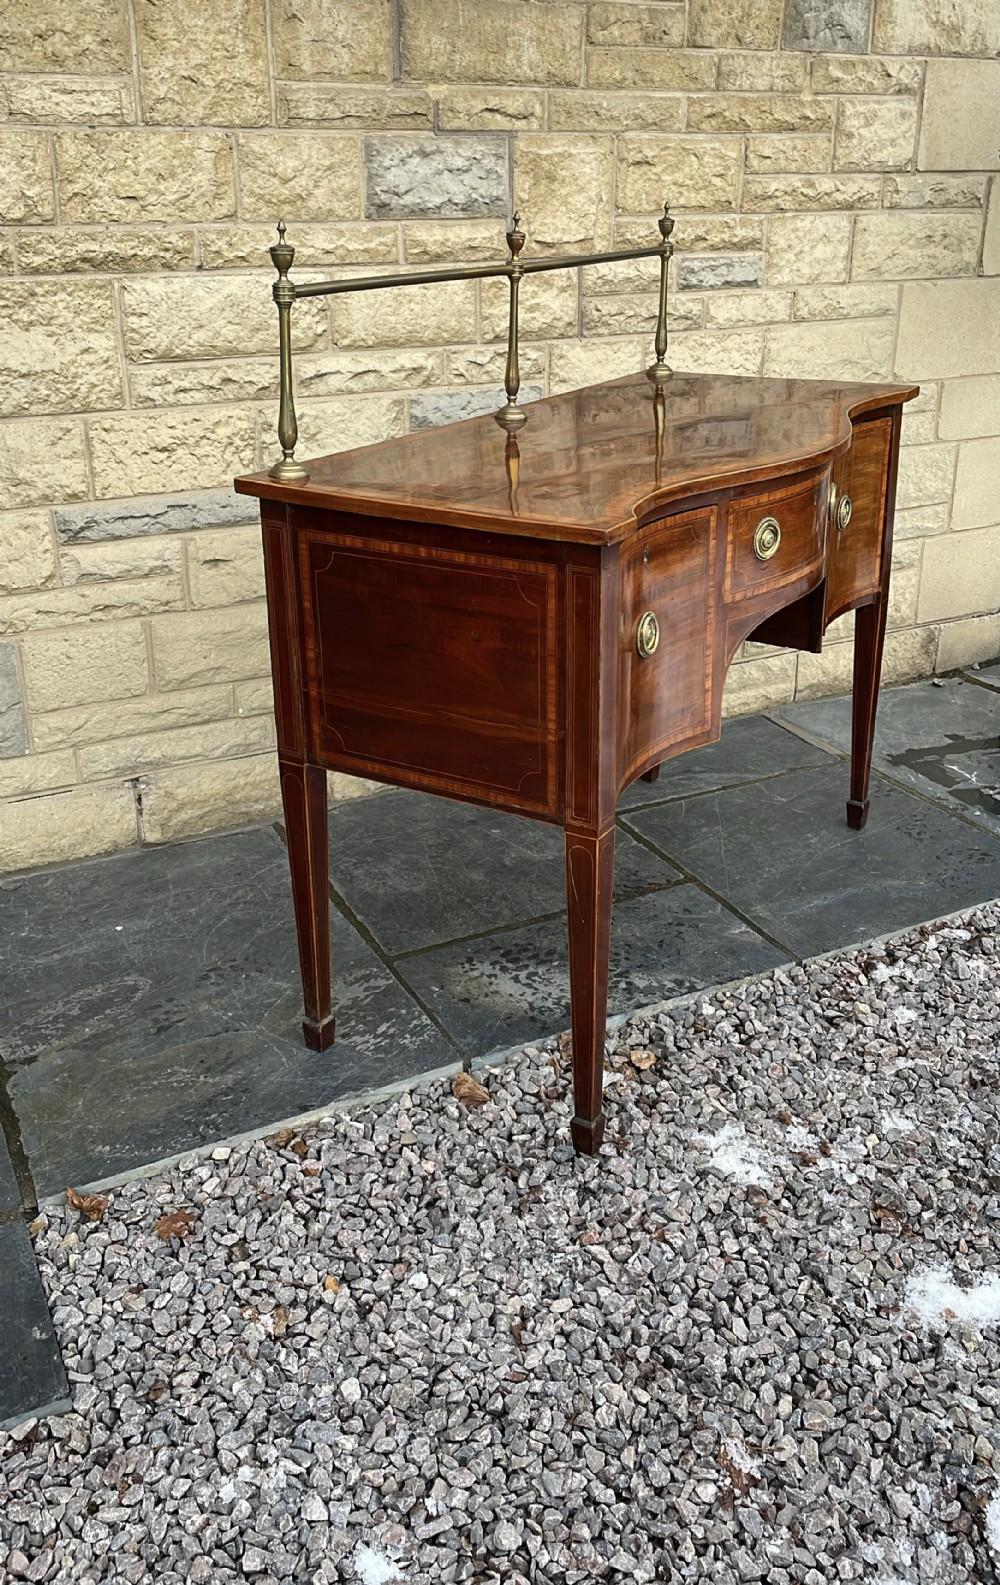  Early 19th C. English Inlaid Figured Mahogany Hepp. Style Serpentine Sideboard For Sale 1